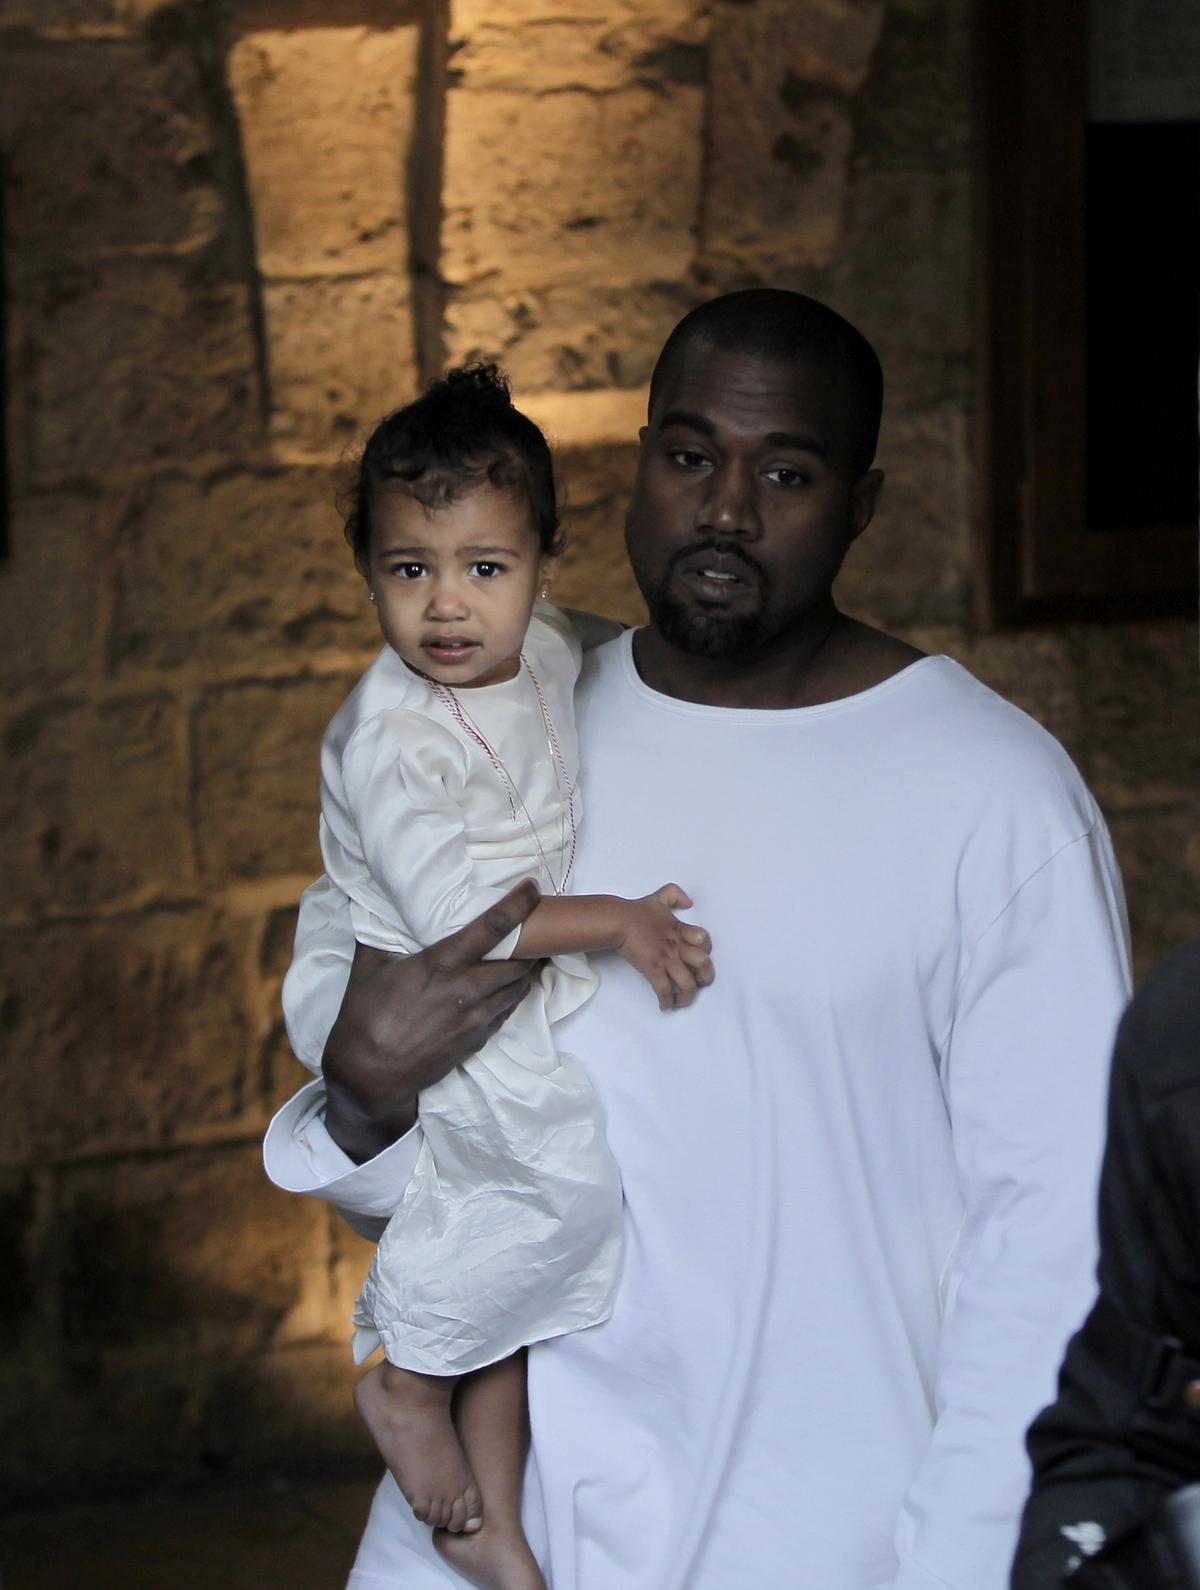 Kanye West carries his daughter, North, following a reported baptism ceremony at the Armenian St. James Cathedral in Jerusalem's Old City on April 13, 2015. (AHMAD GHARABLI/AFP via Getty Images)